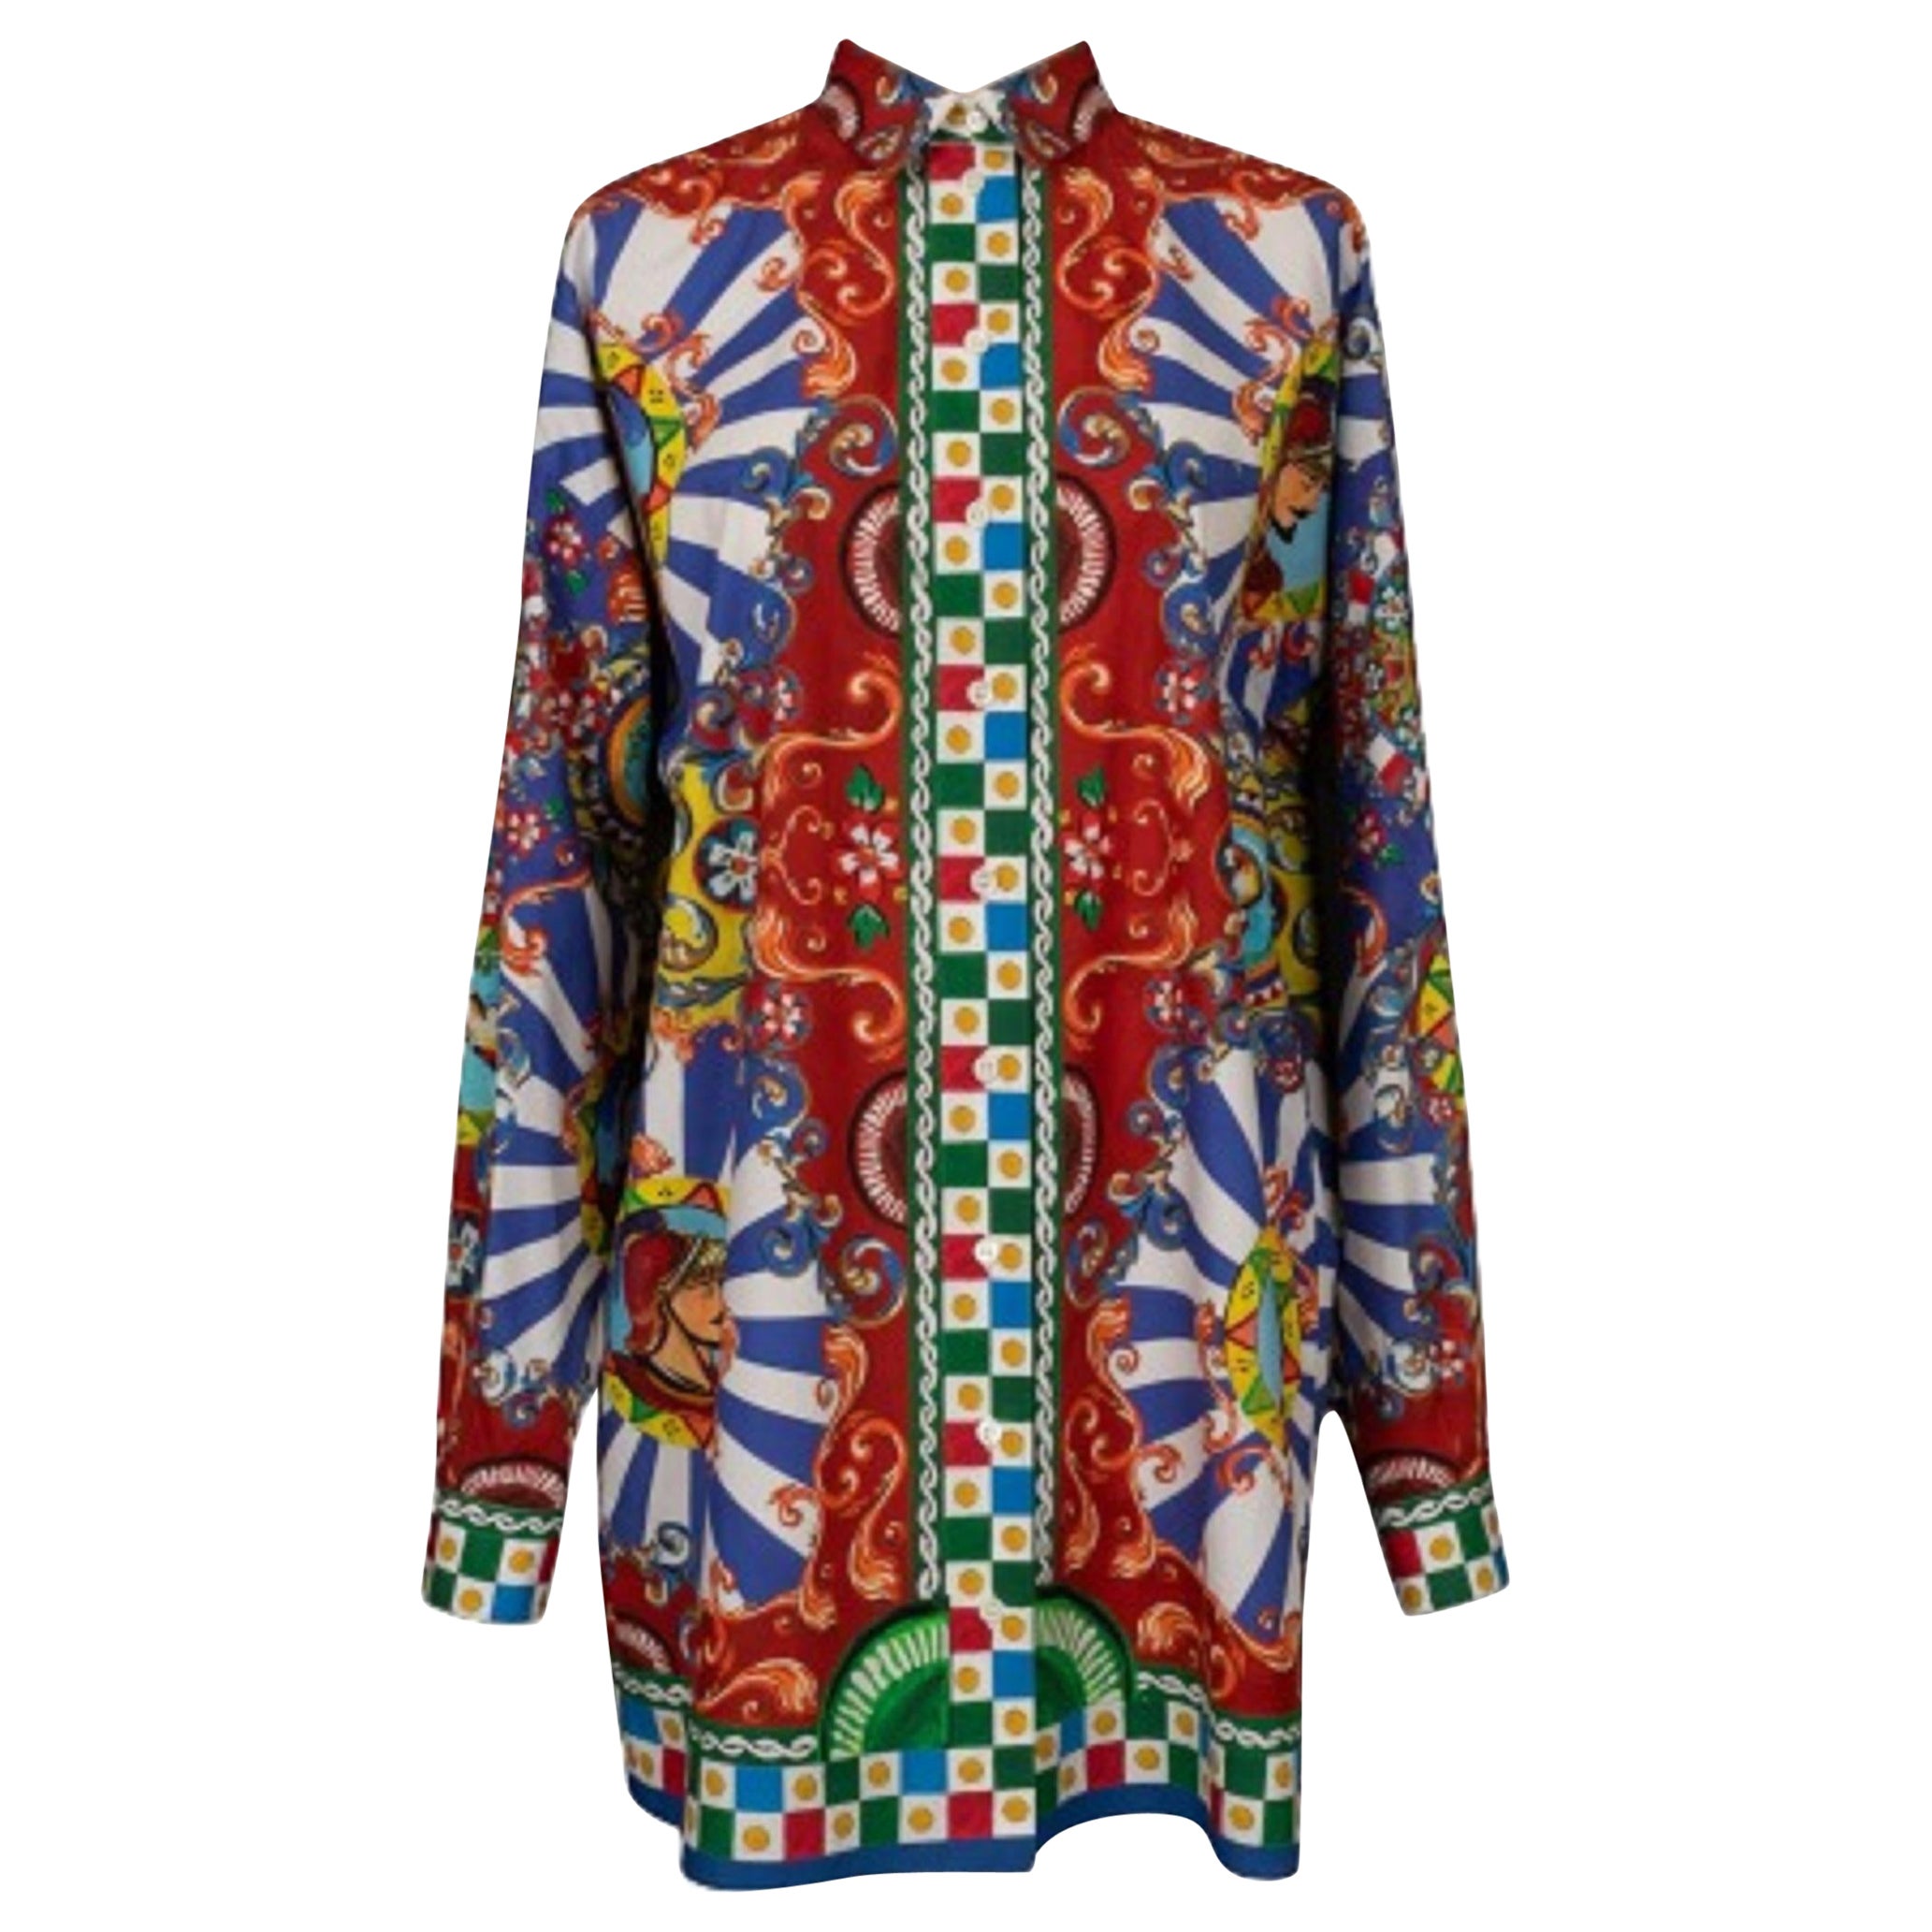 Dolce & Gabbana Multicolored Printed Ccotton Shirt, 2016 For Sale